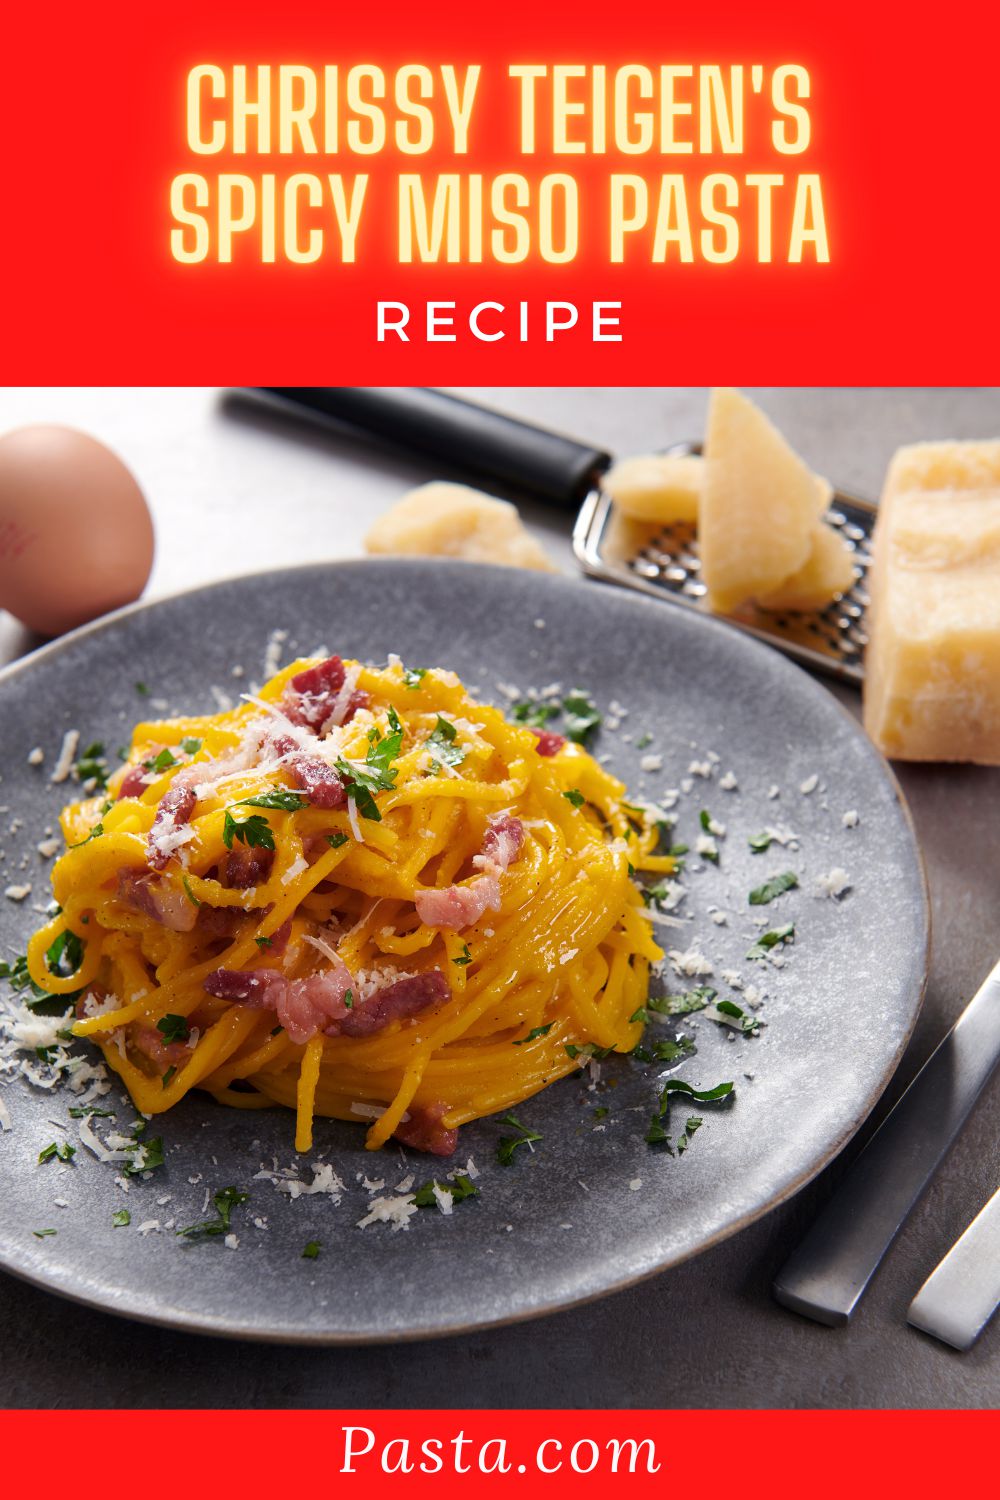 7 Tips for Perfecting Chrissy Teigen's Spicy Miso Pasta (Plus the Recipe) -  